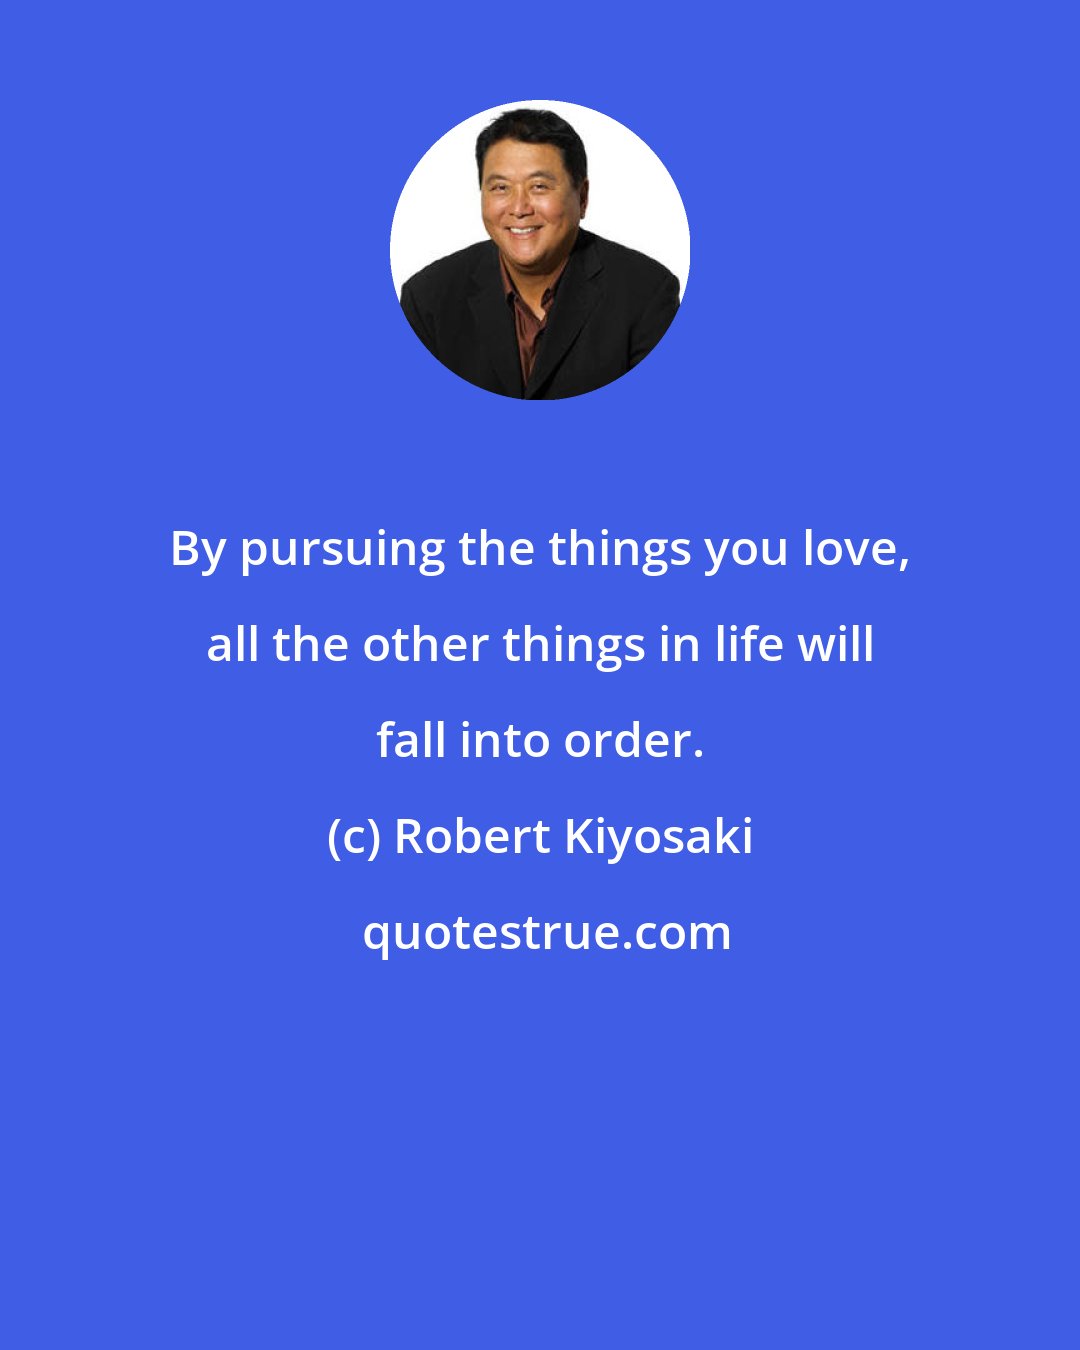 Robert Kiyosaki: By pursuing the things you love, all the other things in life will fall into order.